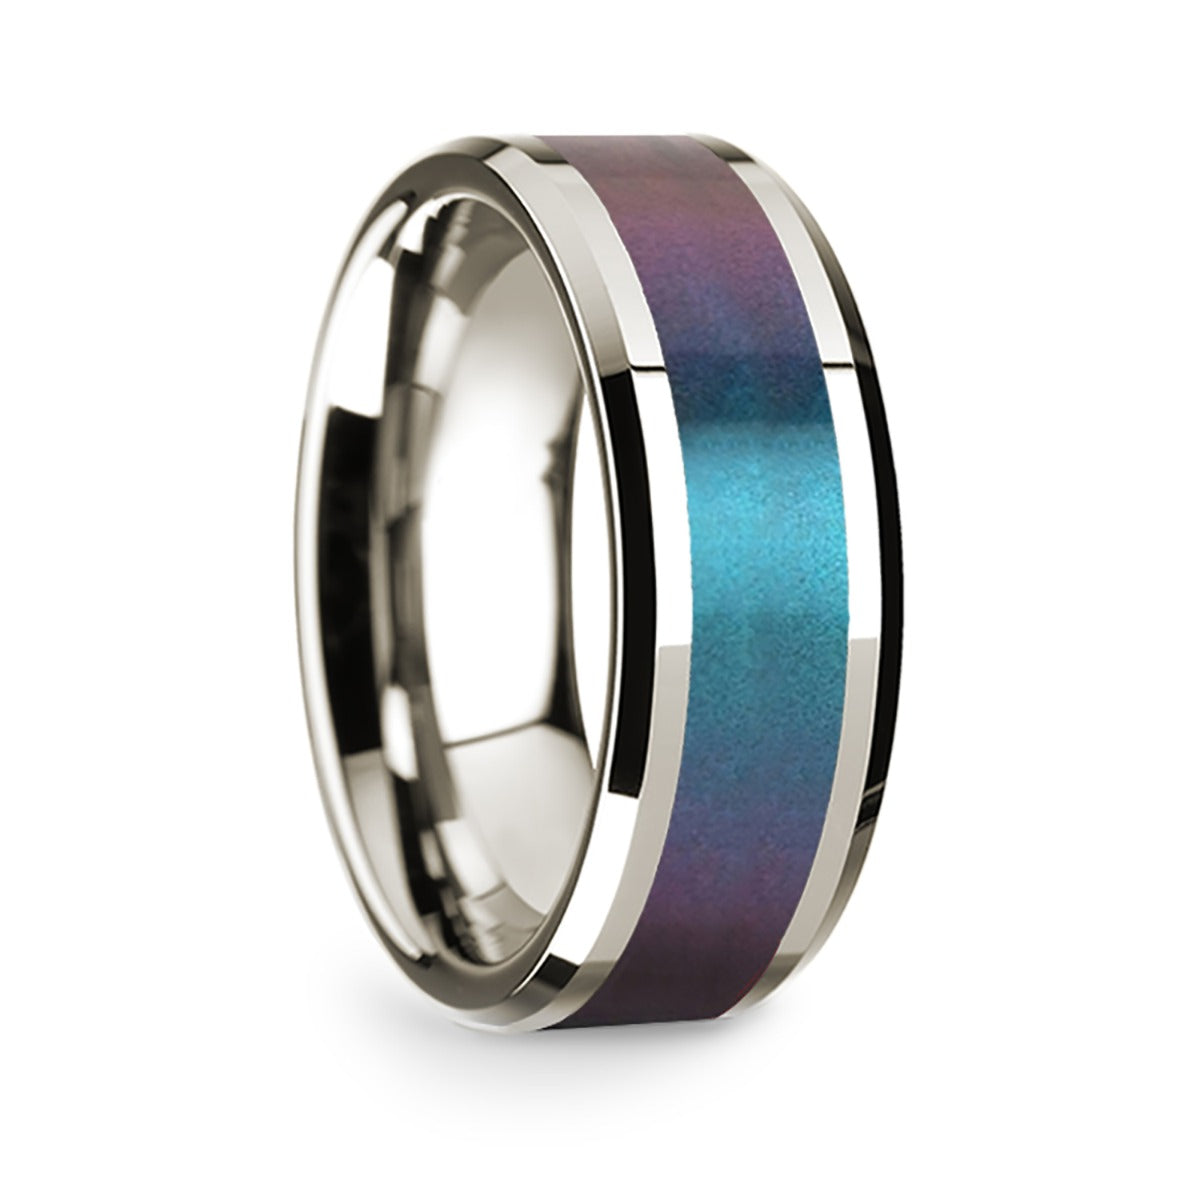 14k White Gold Men's Wedding Band with Blue & Purple Color Changing Inlay